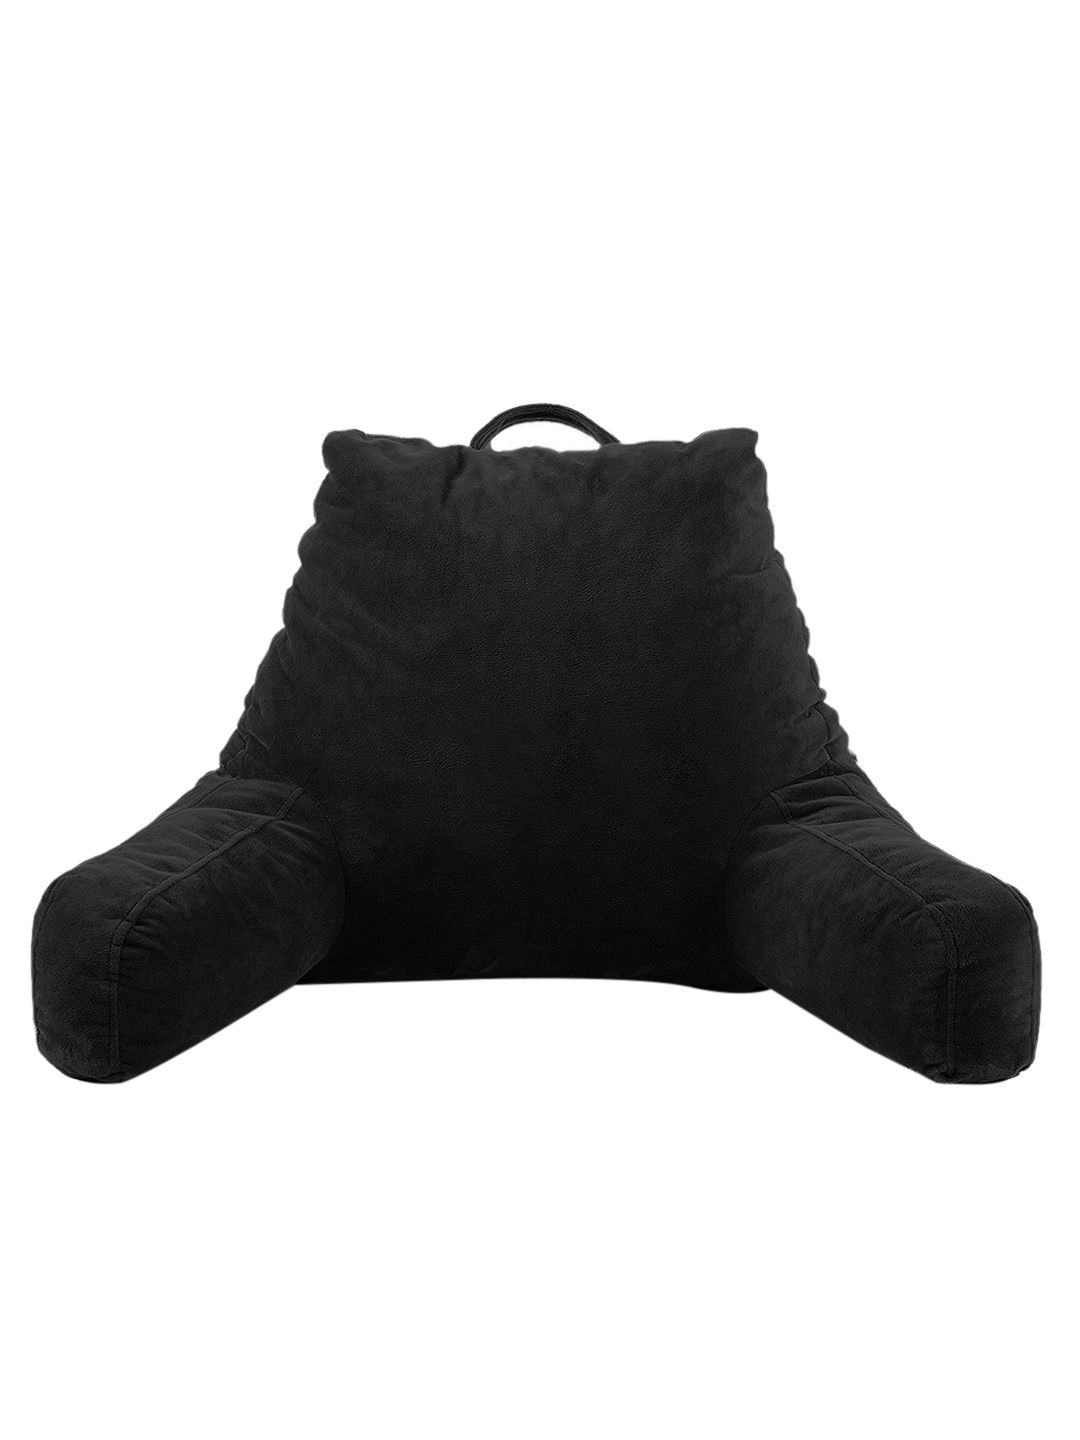 Pum Pum Black Reading Pillow Cushion with Hand Support Price in India